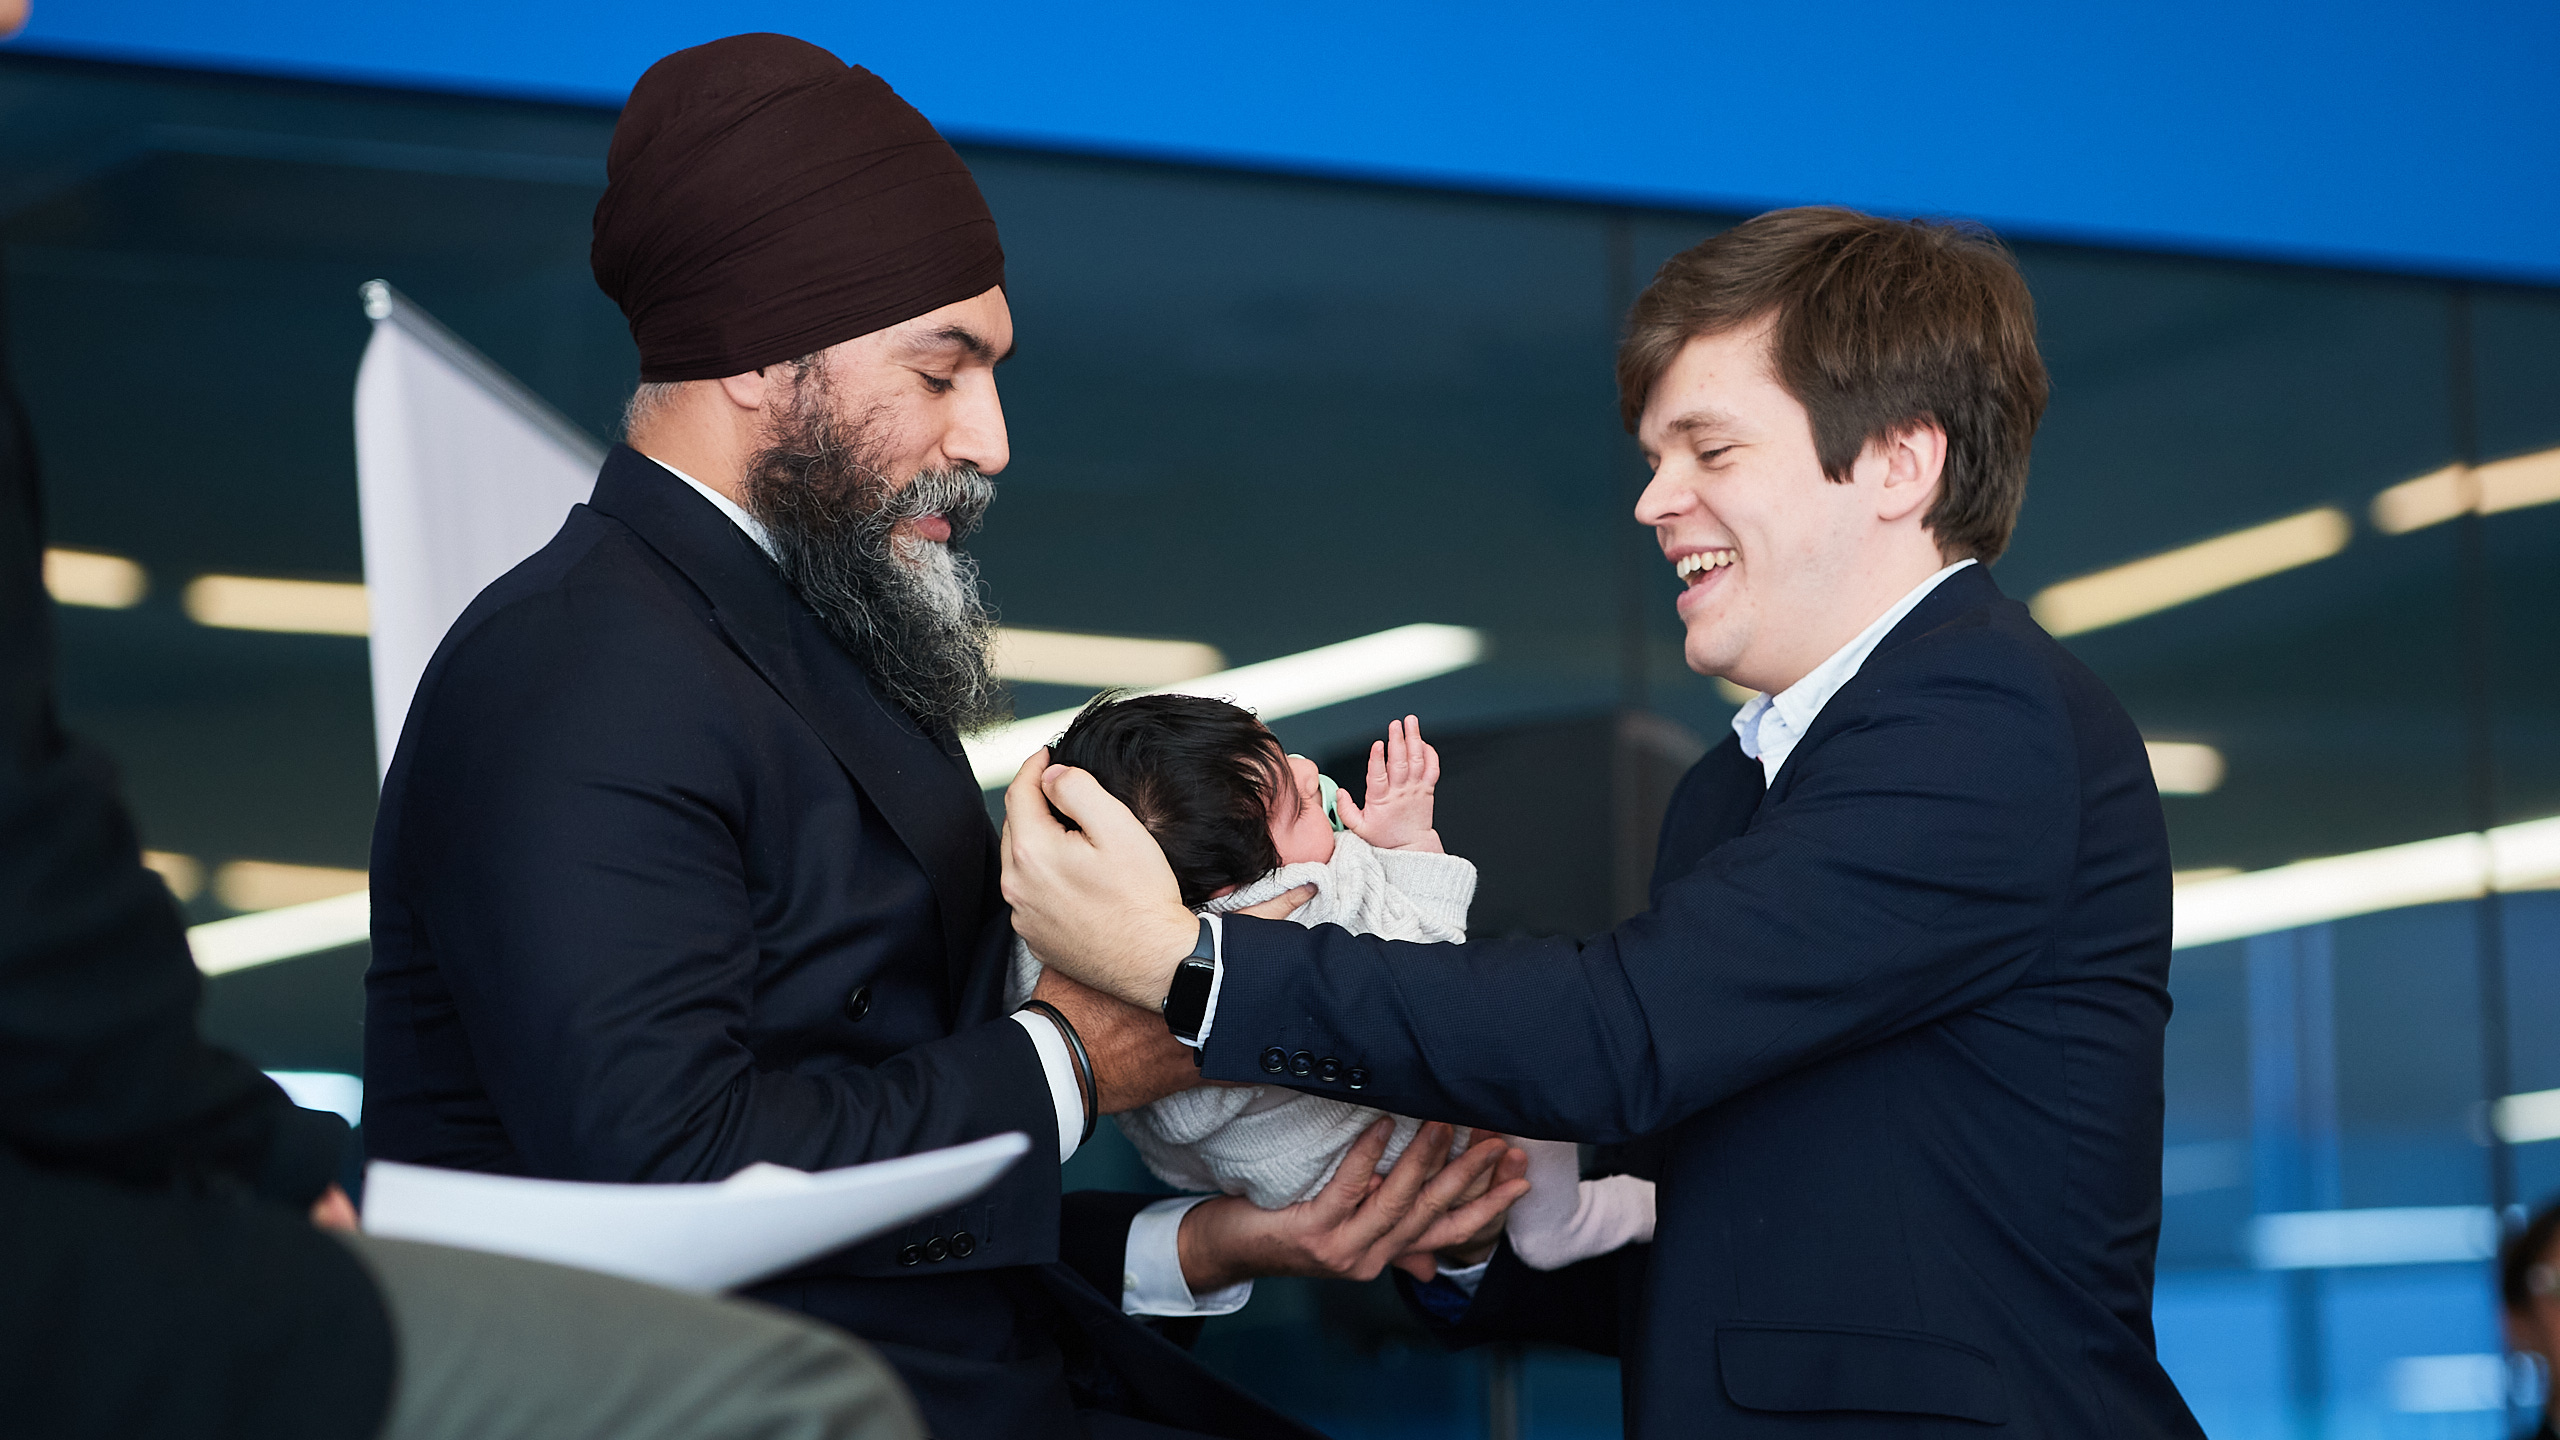 Jagmeet Singh holds his child on stage as a staffer helps him